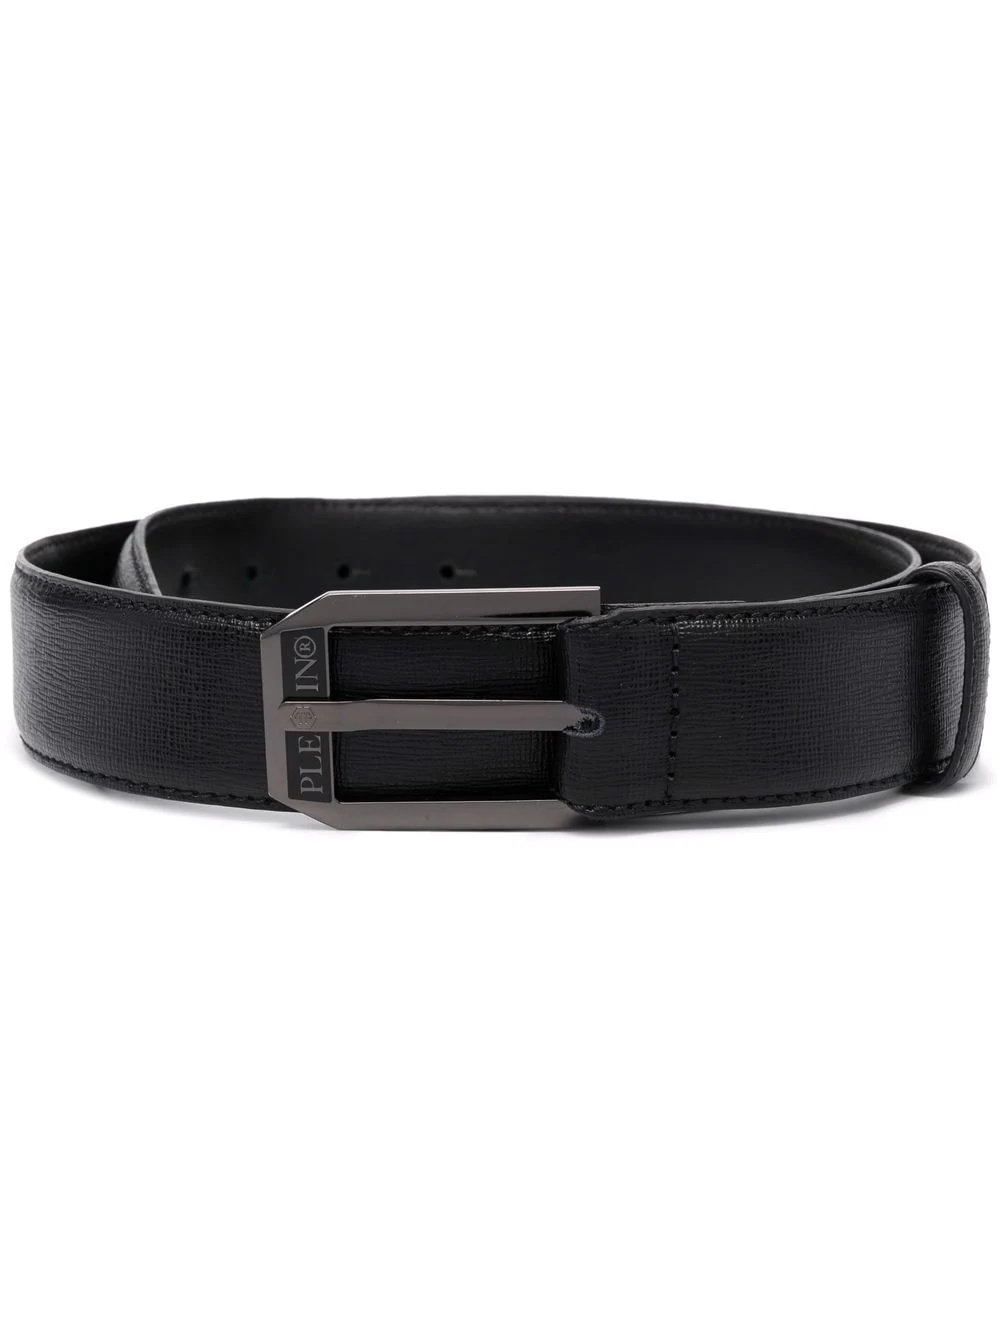 Saffiano leather buckled belt - 1